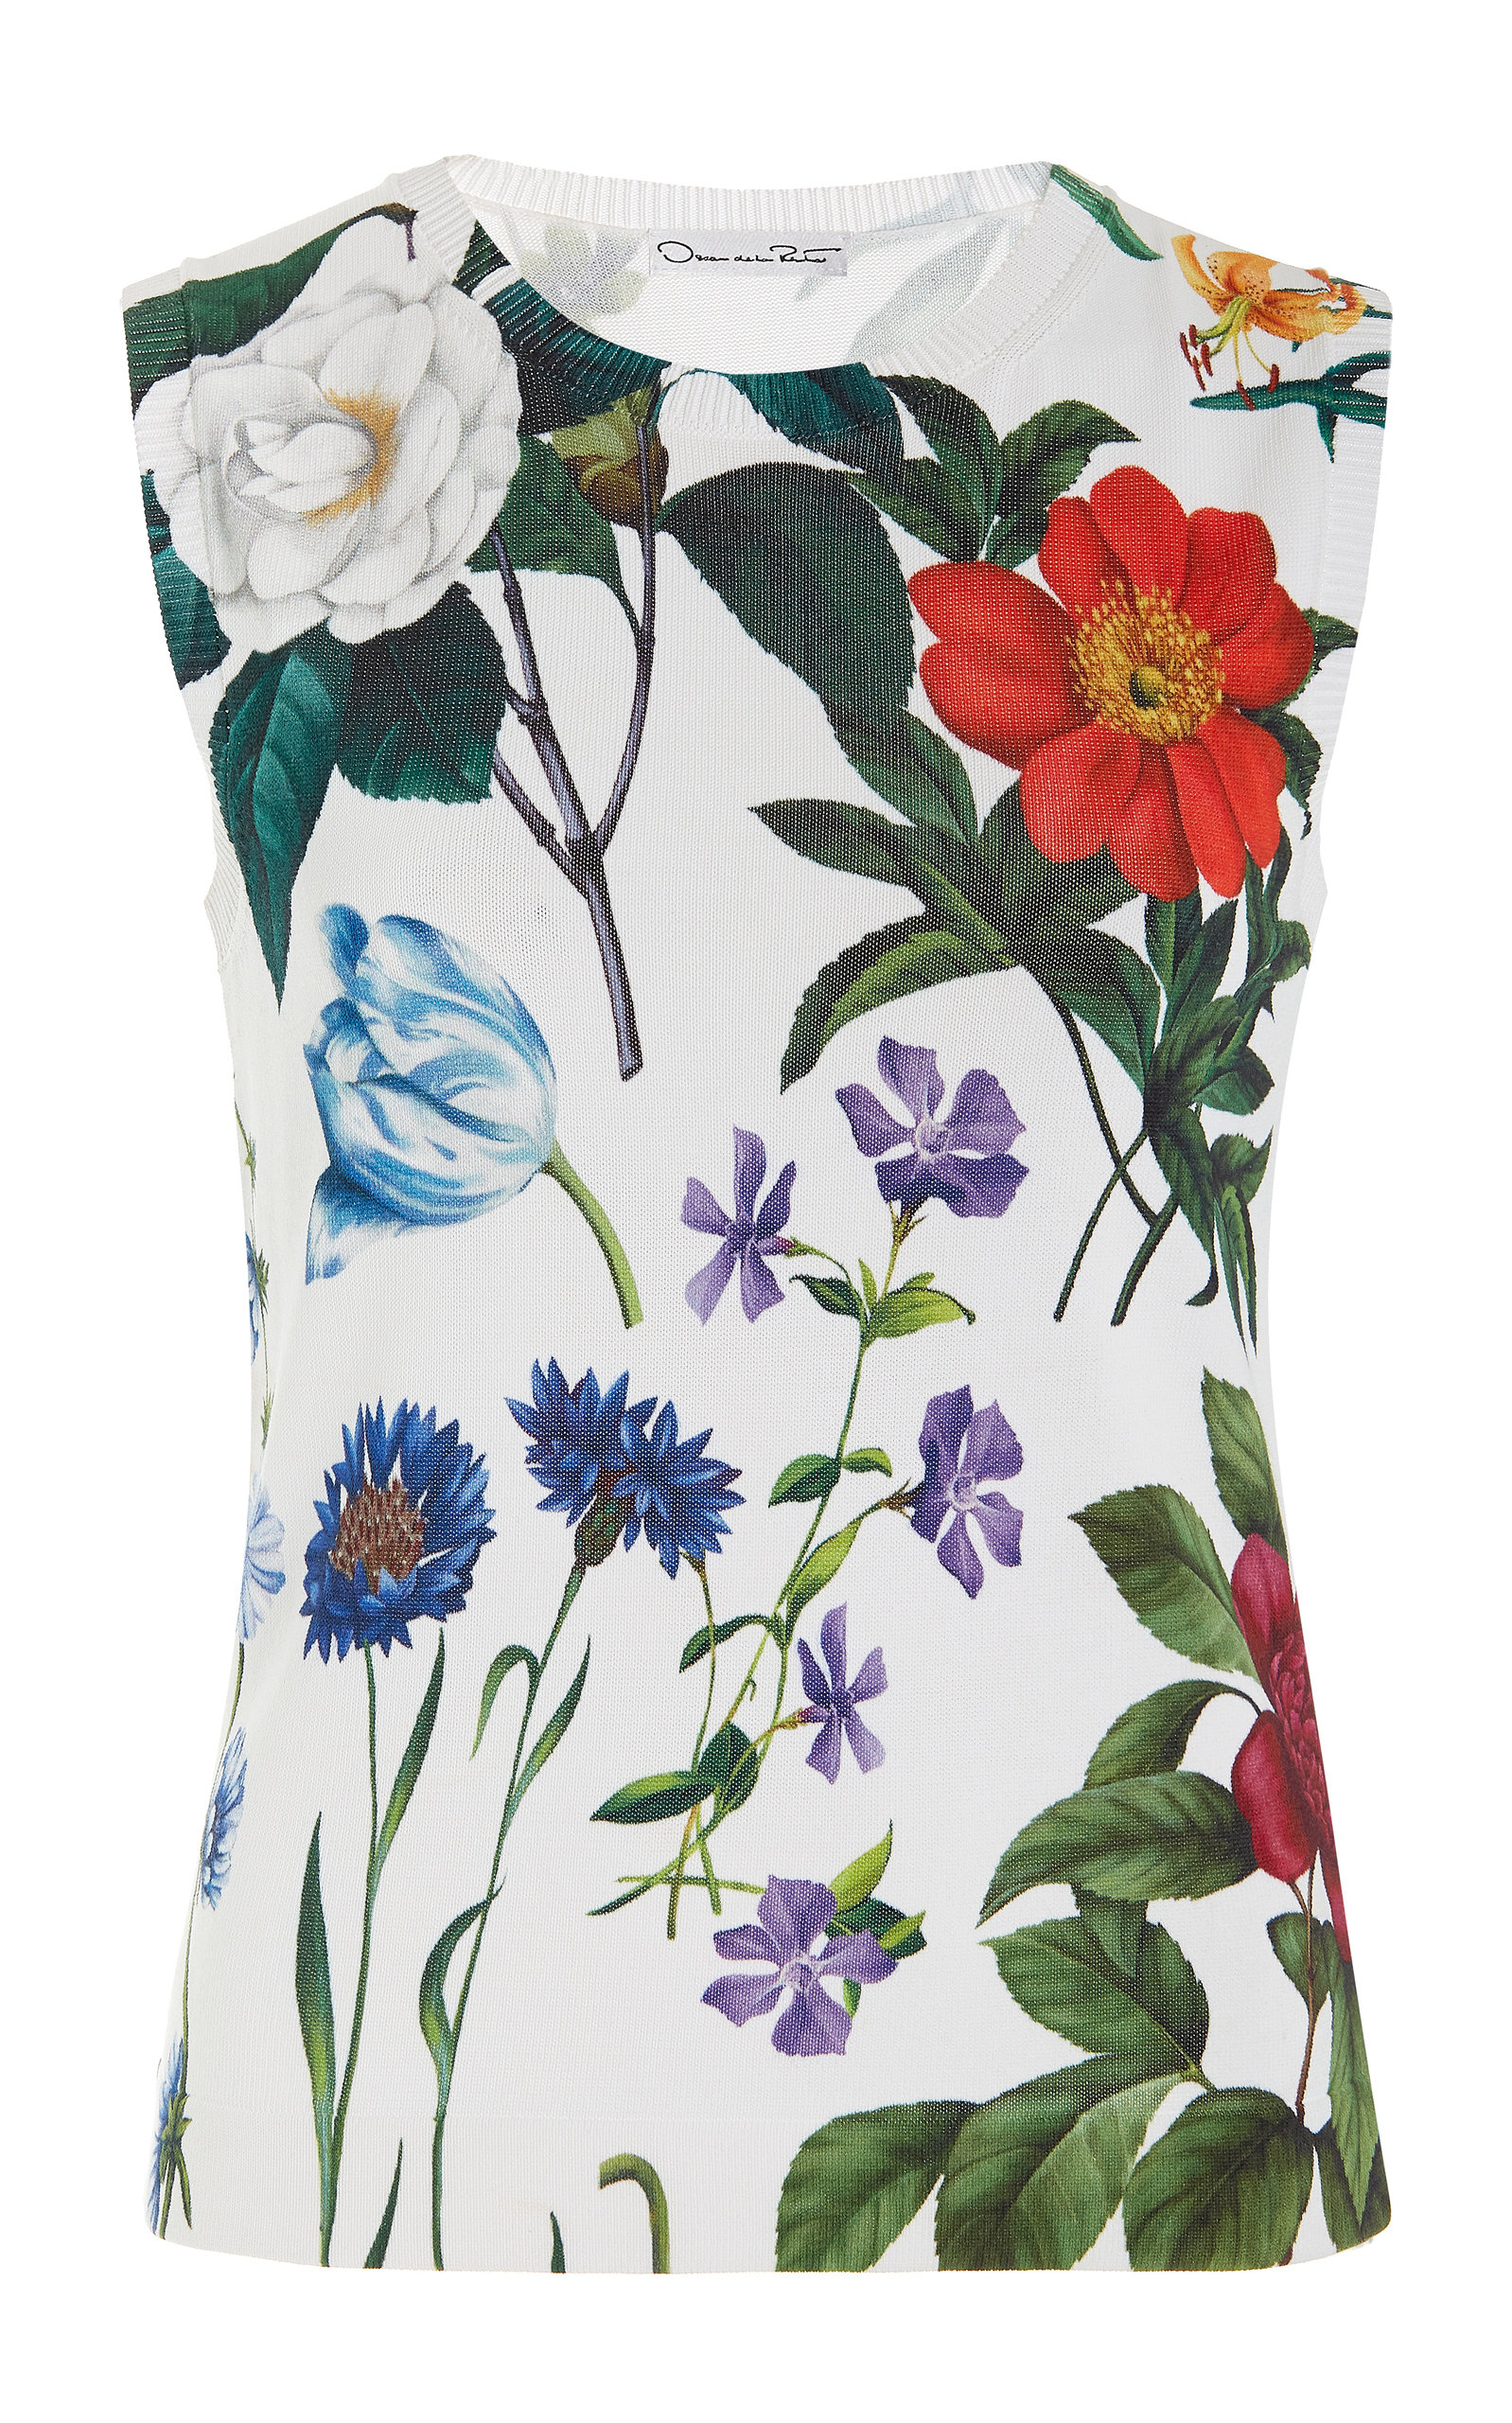 Best Selling Oscar la - Women's Floral-Print Tank - Floral - Only At Moda | AccuWeather Shop